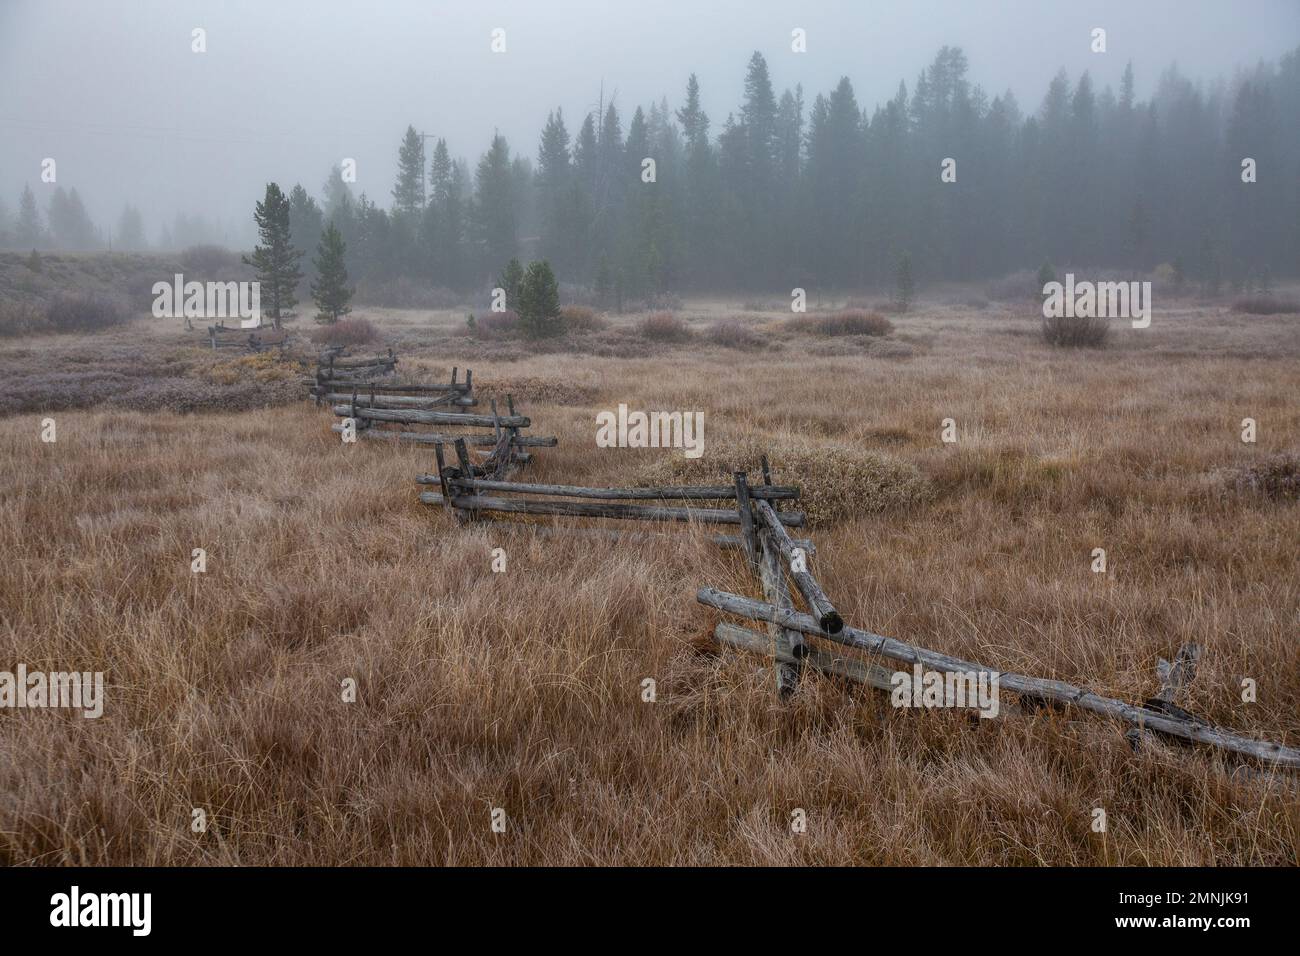 USA, Idaho, Stanley, Rural scene with rail fence and forest Stock Photo